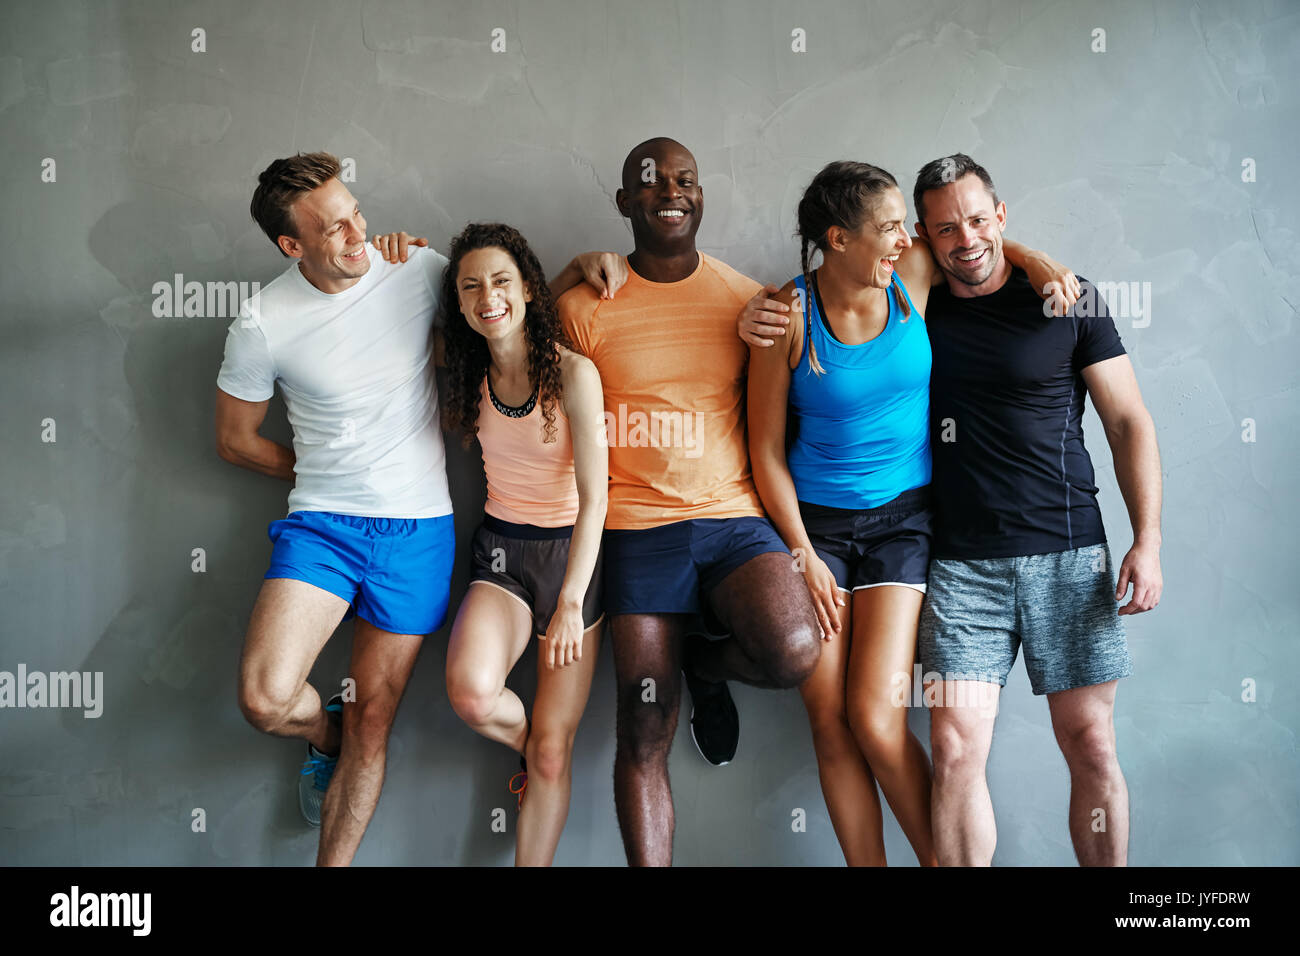 Smiling group of friends in sportswear laughing together while standing arm in arm in a gym after a workout Stock Photo